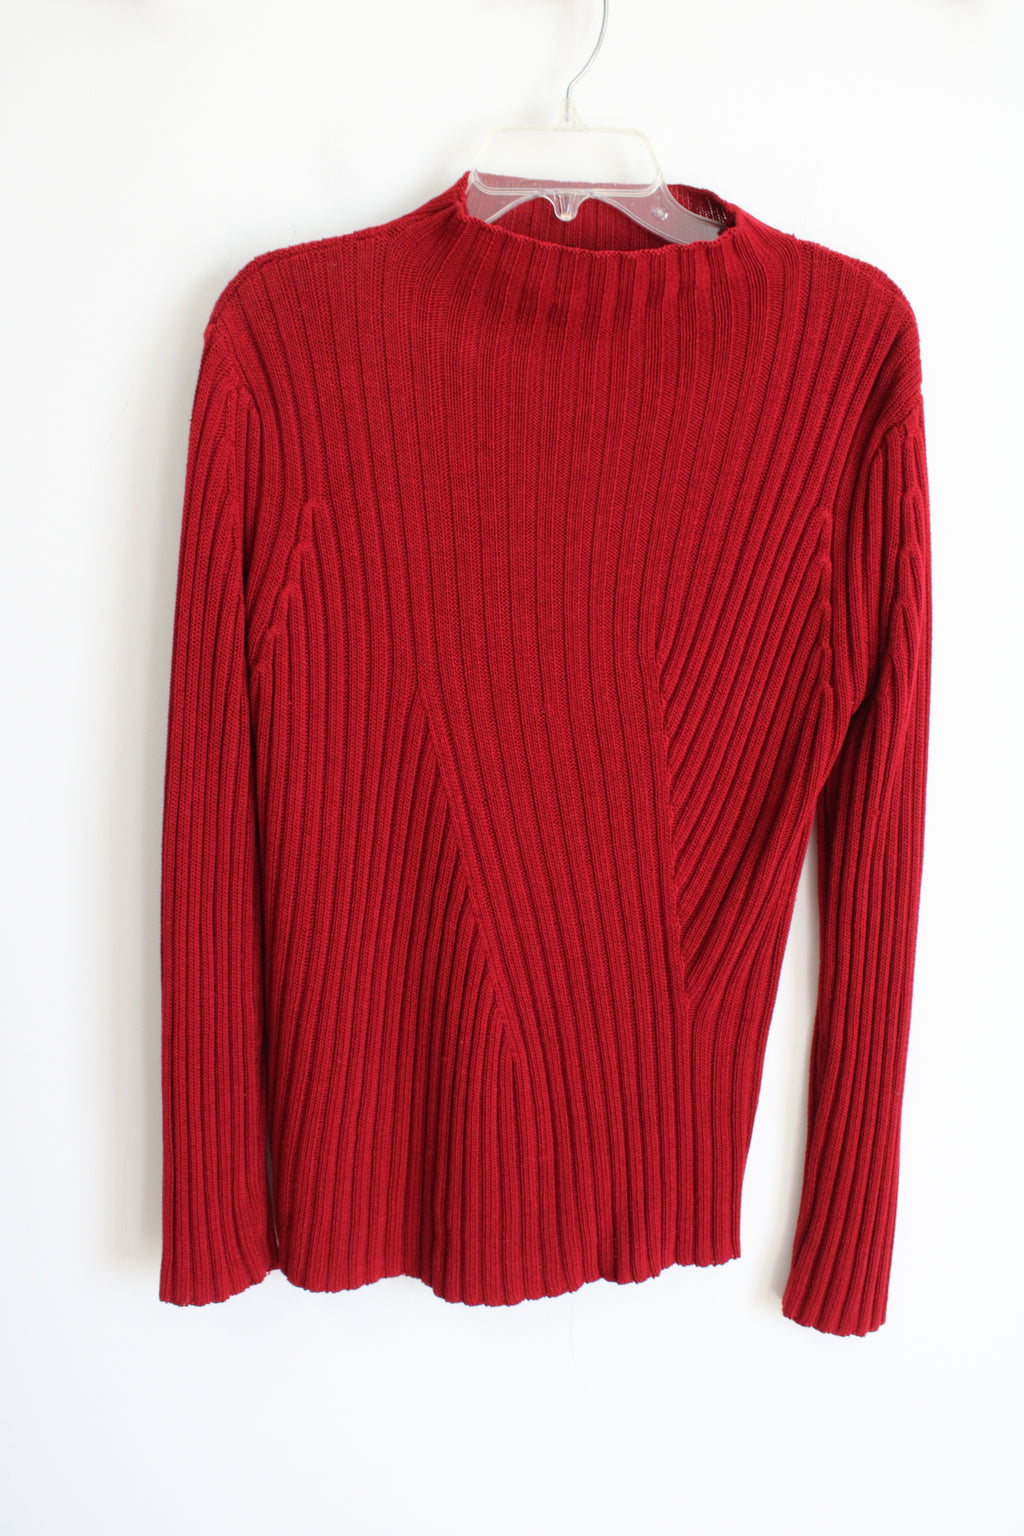 Express World Brand Vintage Red Ribbed Knit Mock Neck Sweater | XL